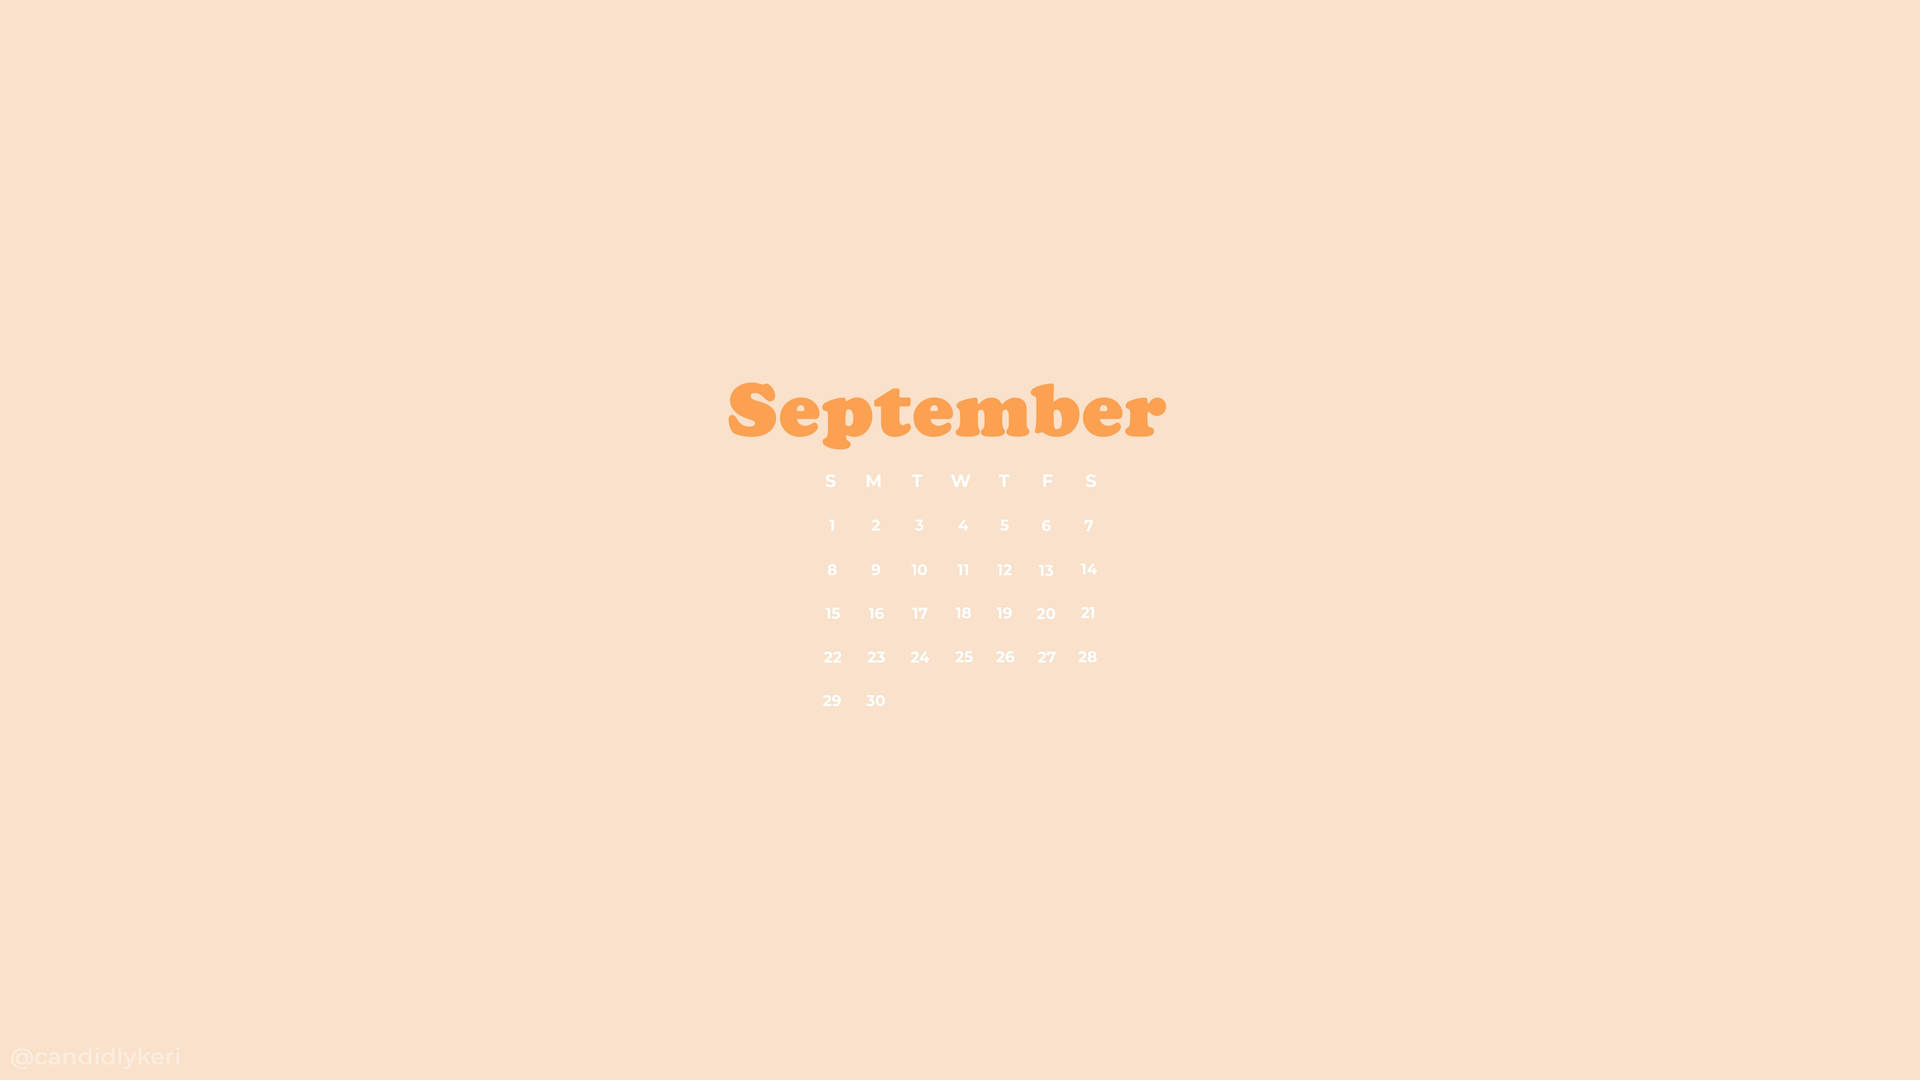 Get organized for September with this minimalist calendar Wallpaper